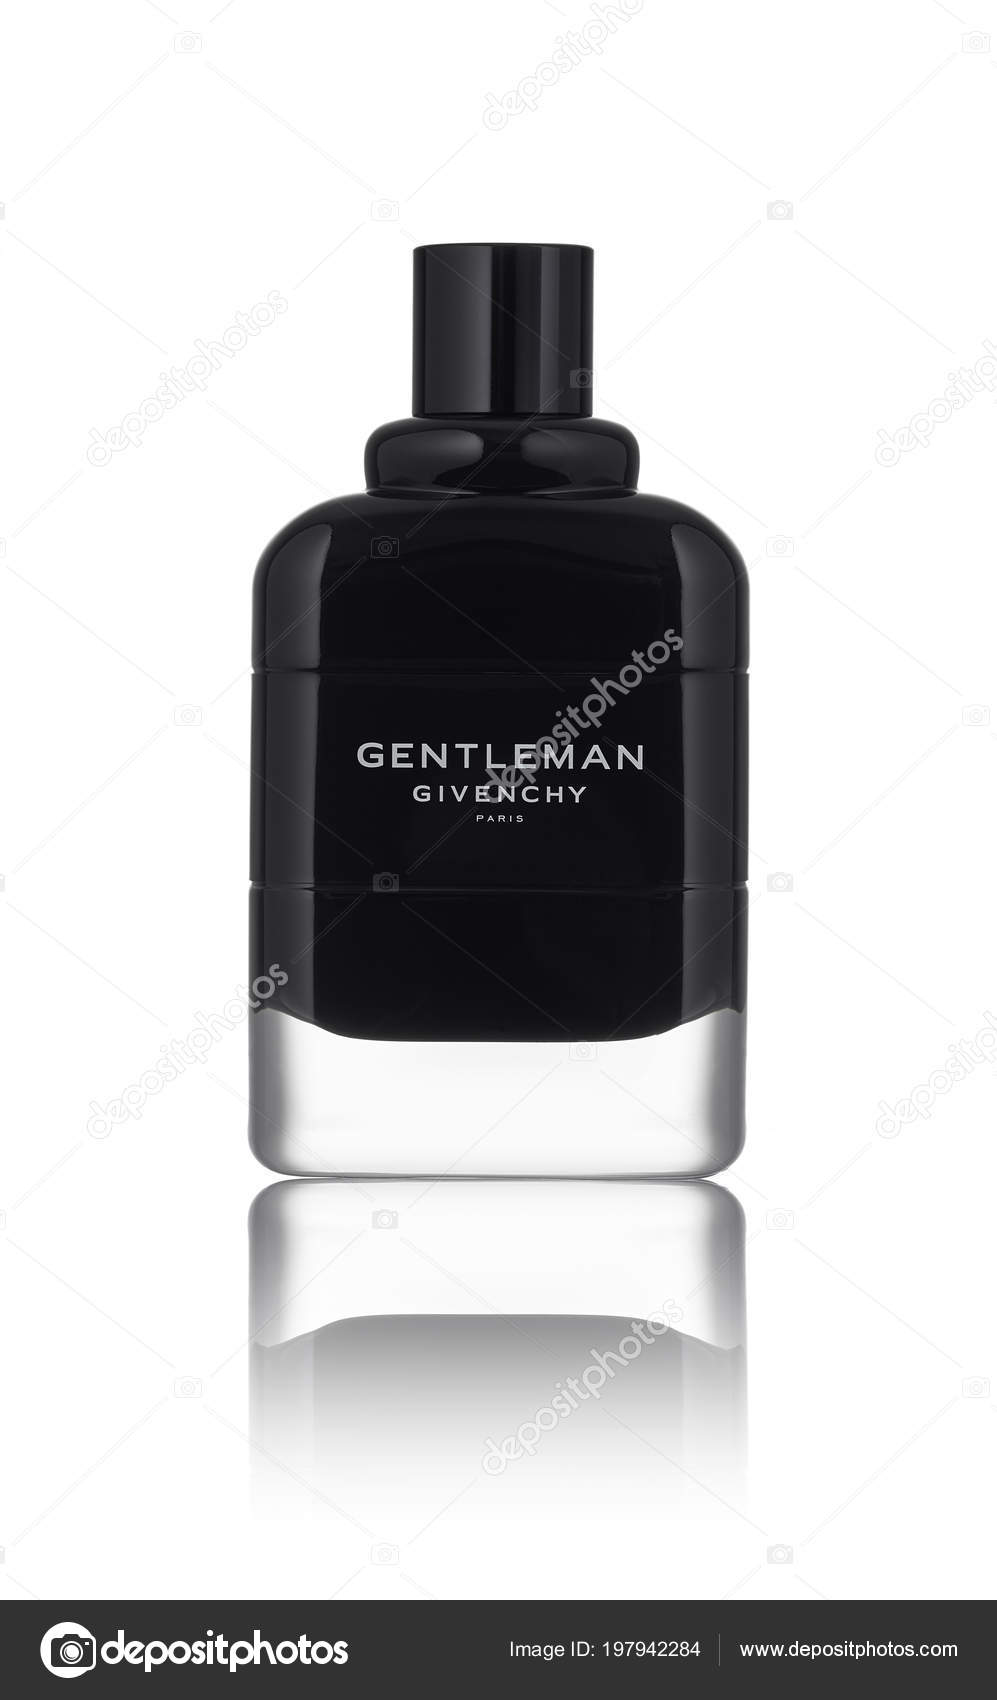 givenchy new fragrance 2018